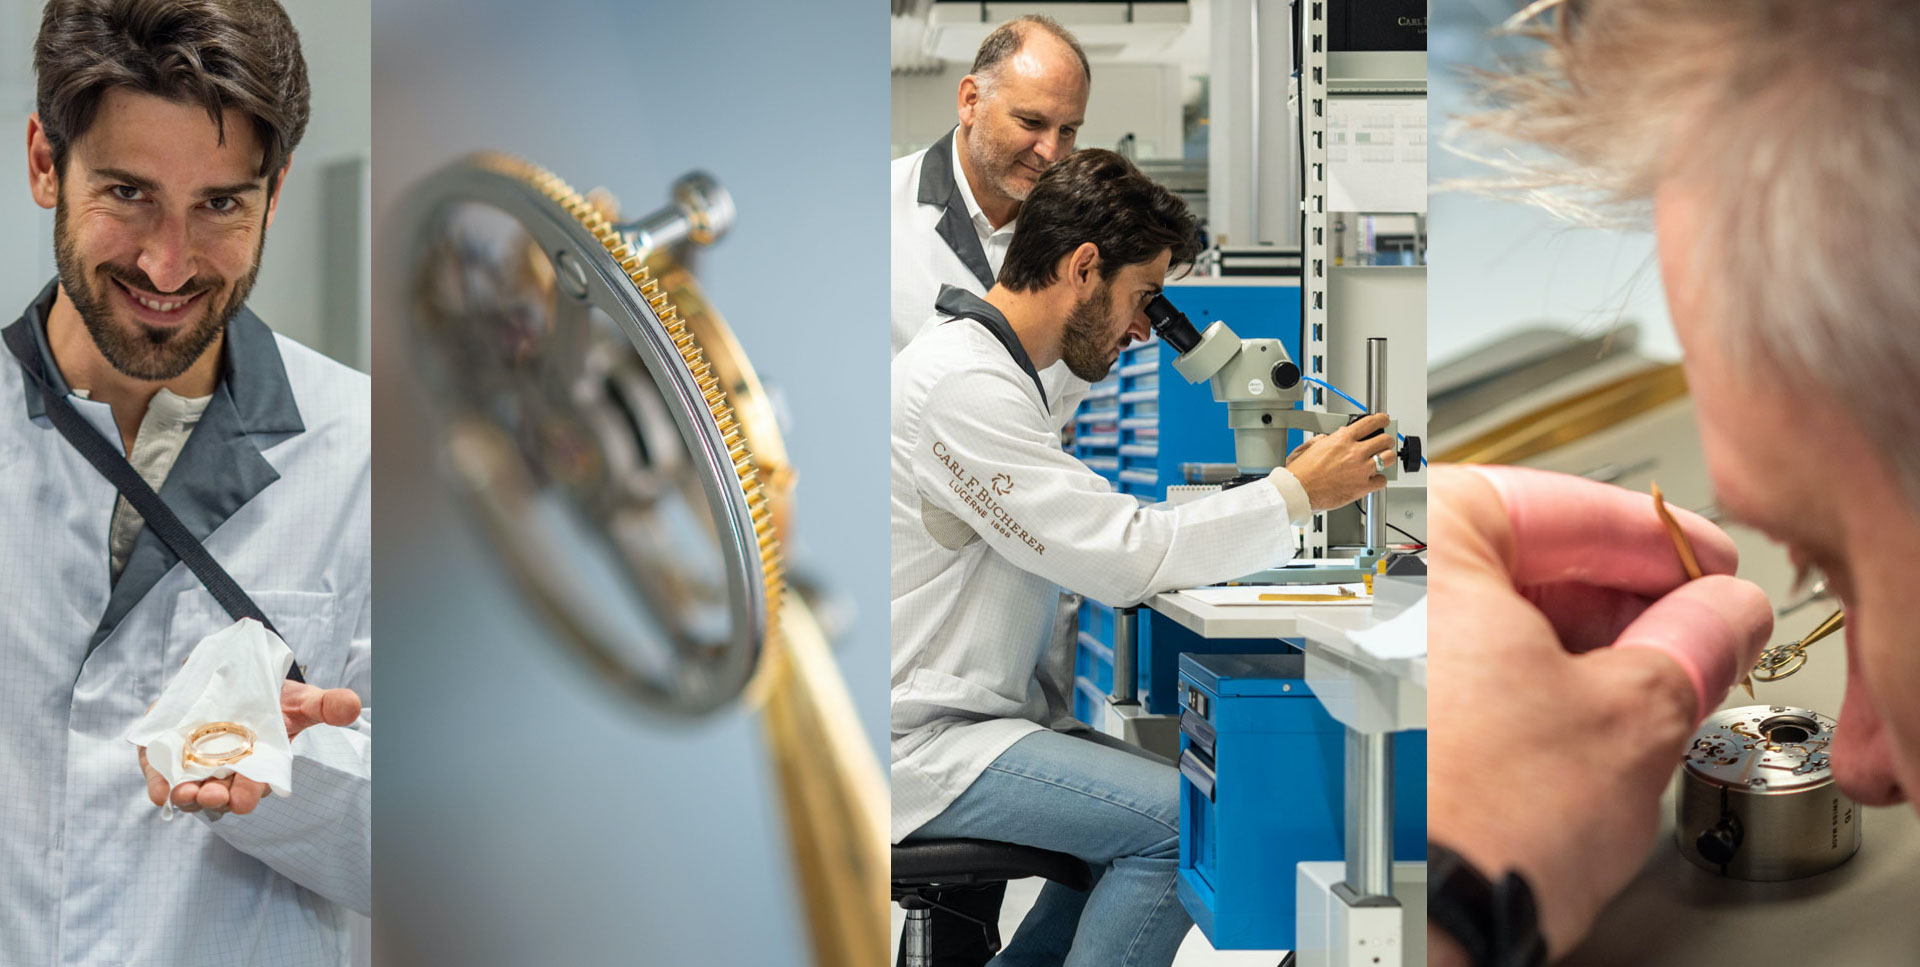 A Special Visit To Lucerne & The Carl F. Bucherer Watch Manufacture